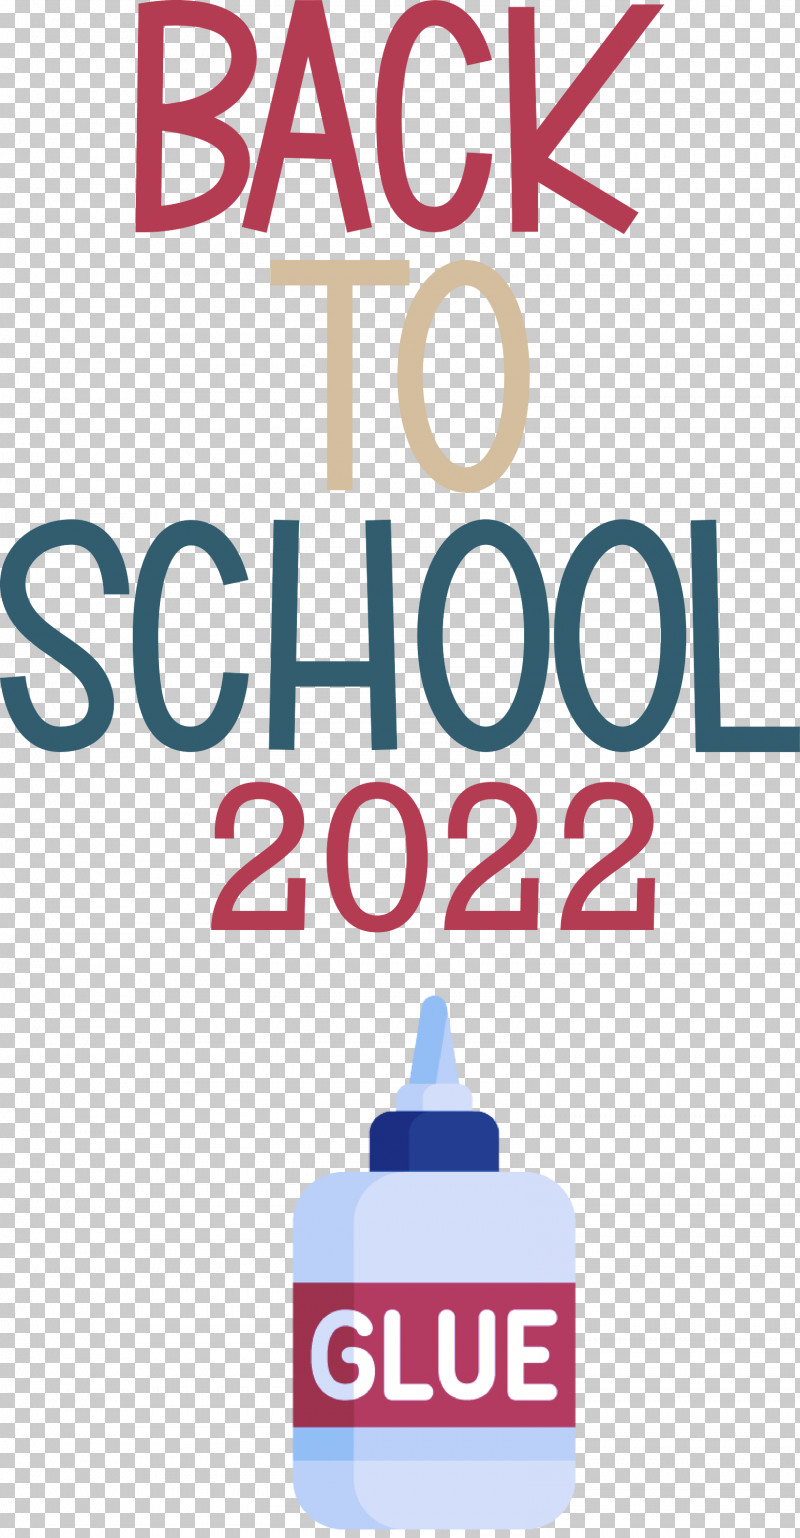 Back To School 2022 PNG, Clipart, Geometry, Line, Logo, Mathematics, Meter Free PNG Download